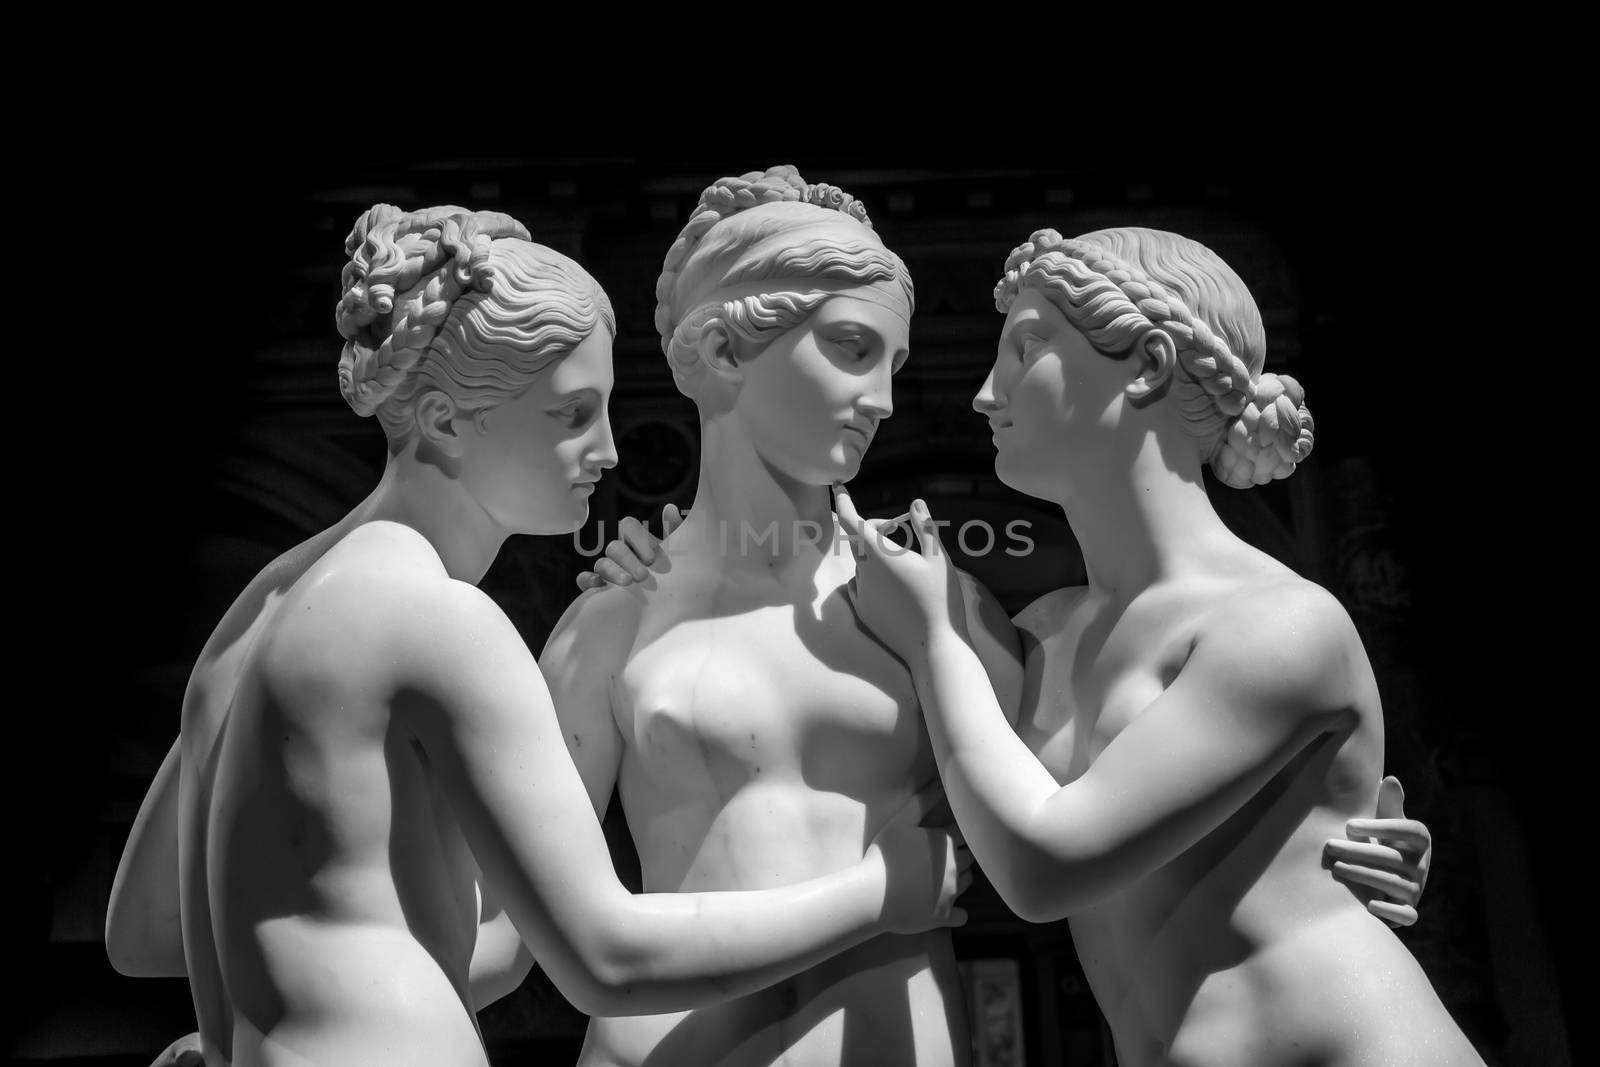 Milan, Italy - June 2020: Bertel Thorvaldsen’s statue The Three Graces. Neoclassical sculpture, in marble, of the mythological three charites.